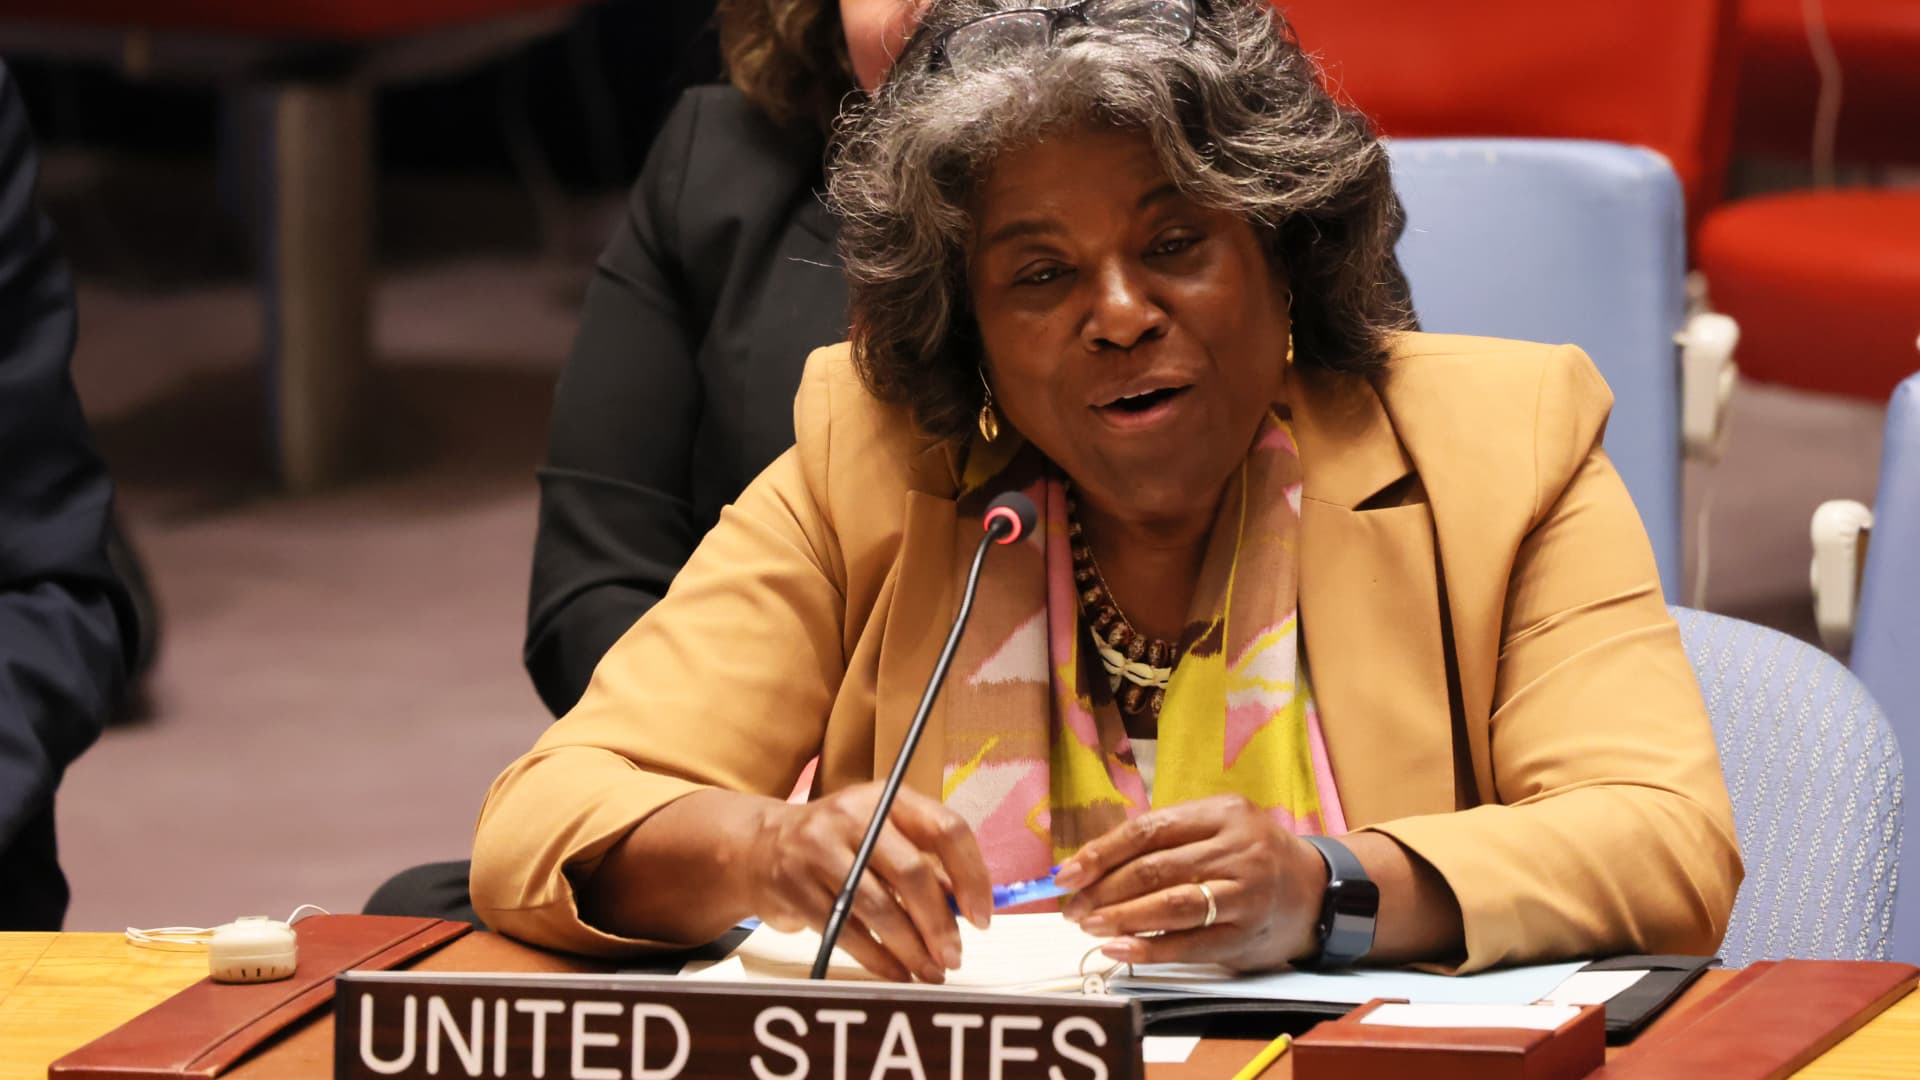 U.S. Representative to the United Nations Ambassador Linda Thomas-Greenfield speaks during a UN Security Council meeting on North Korea at the United Nations headquarters on April 17, 2023 in New York City.